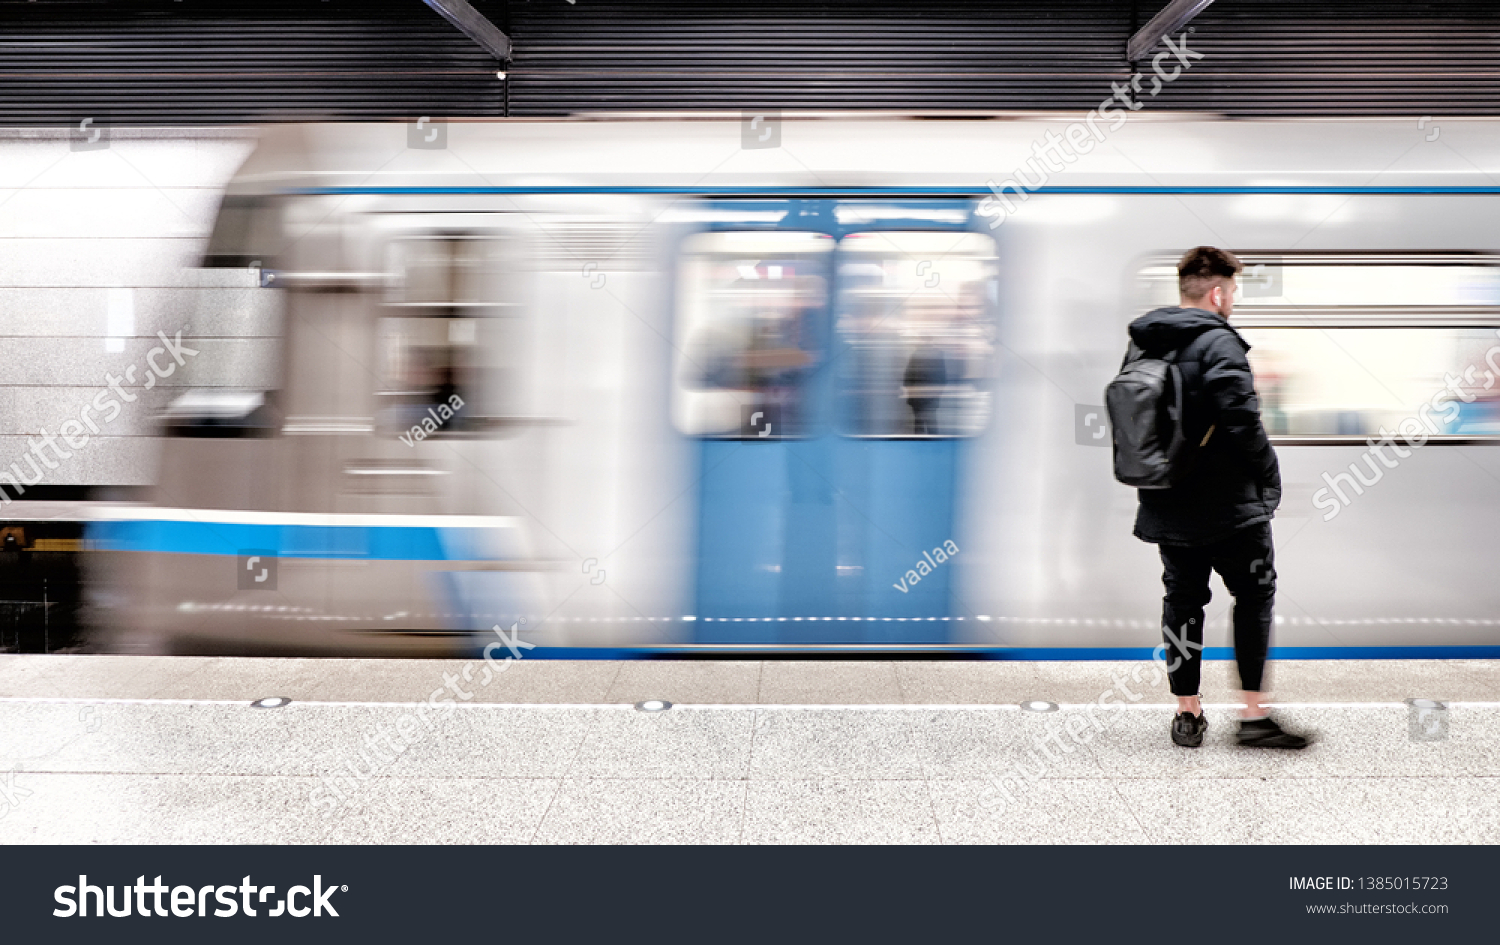 subway train arriving to modern metro station with male passenger person waiting on platform blurred background side view of city transportation underground station with motion car and people #1385015723